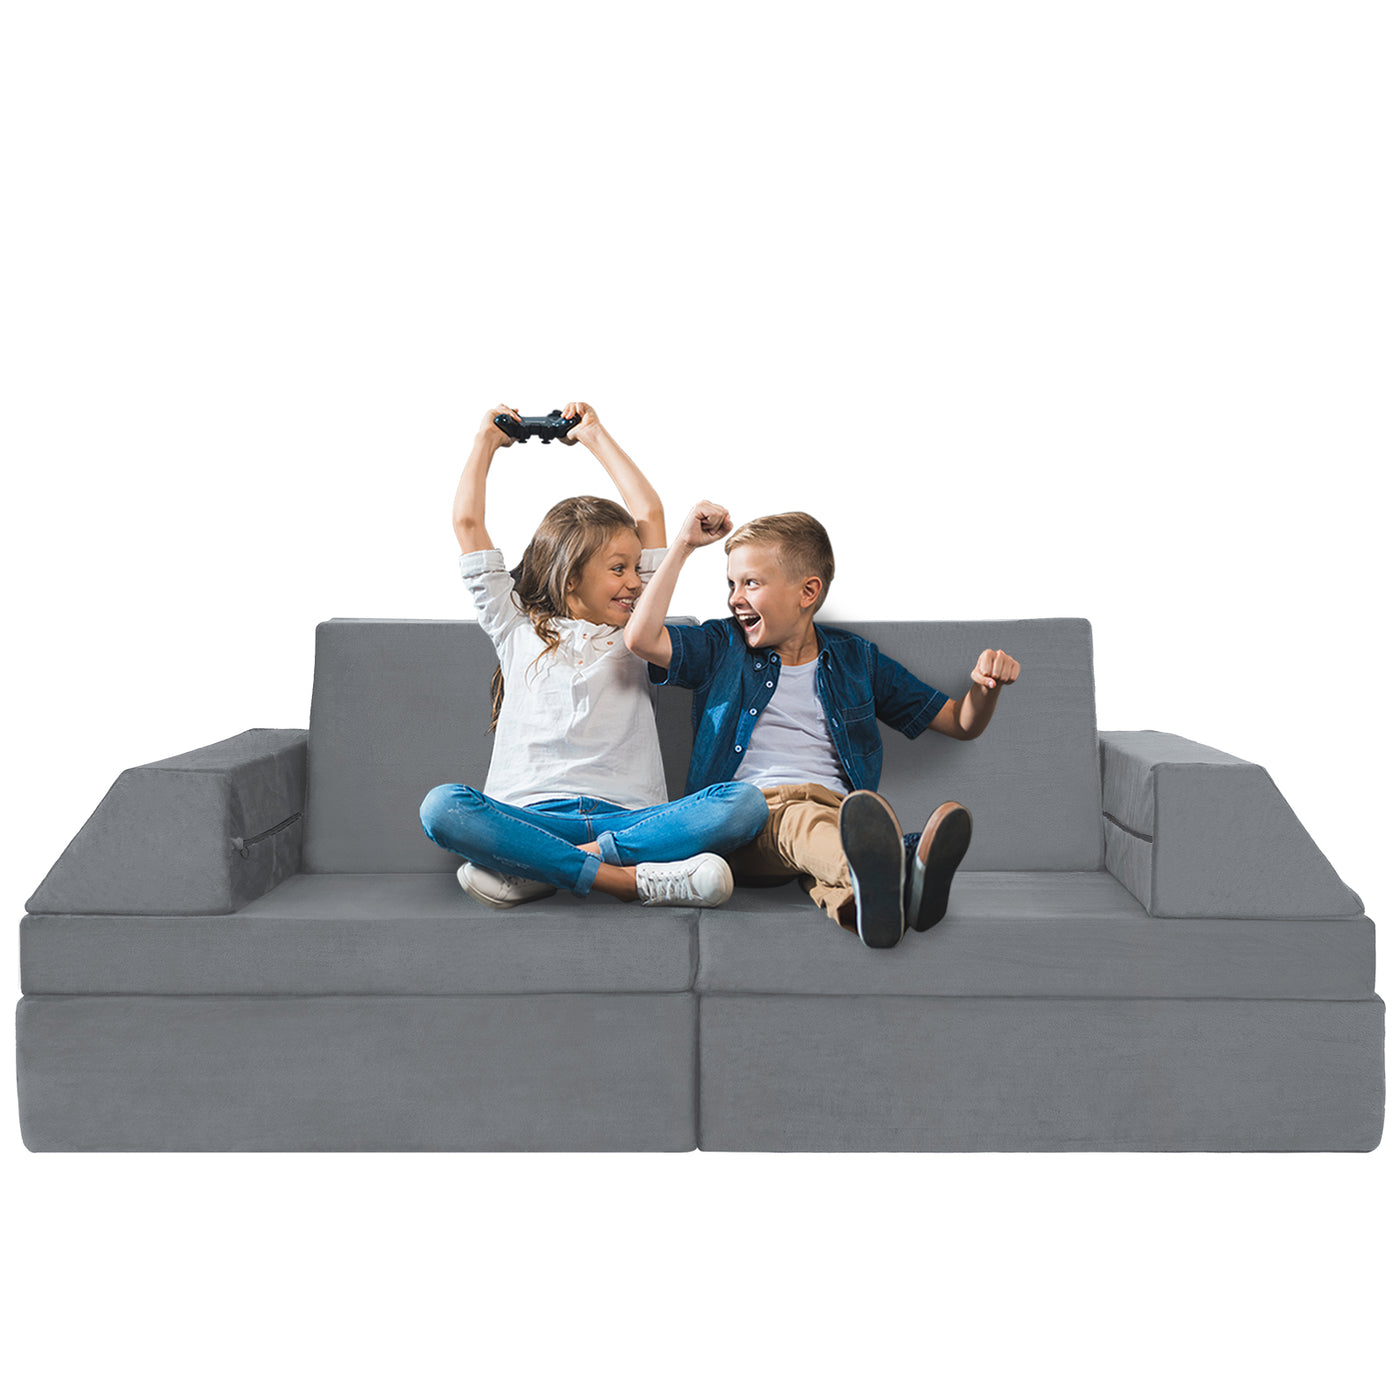 10-Piece Modular Convertible Kids Play Couch Sofa Set with Removable Velvet Covers (Grey)